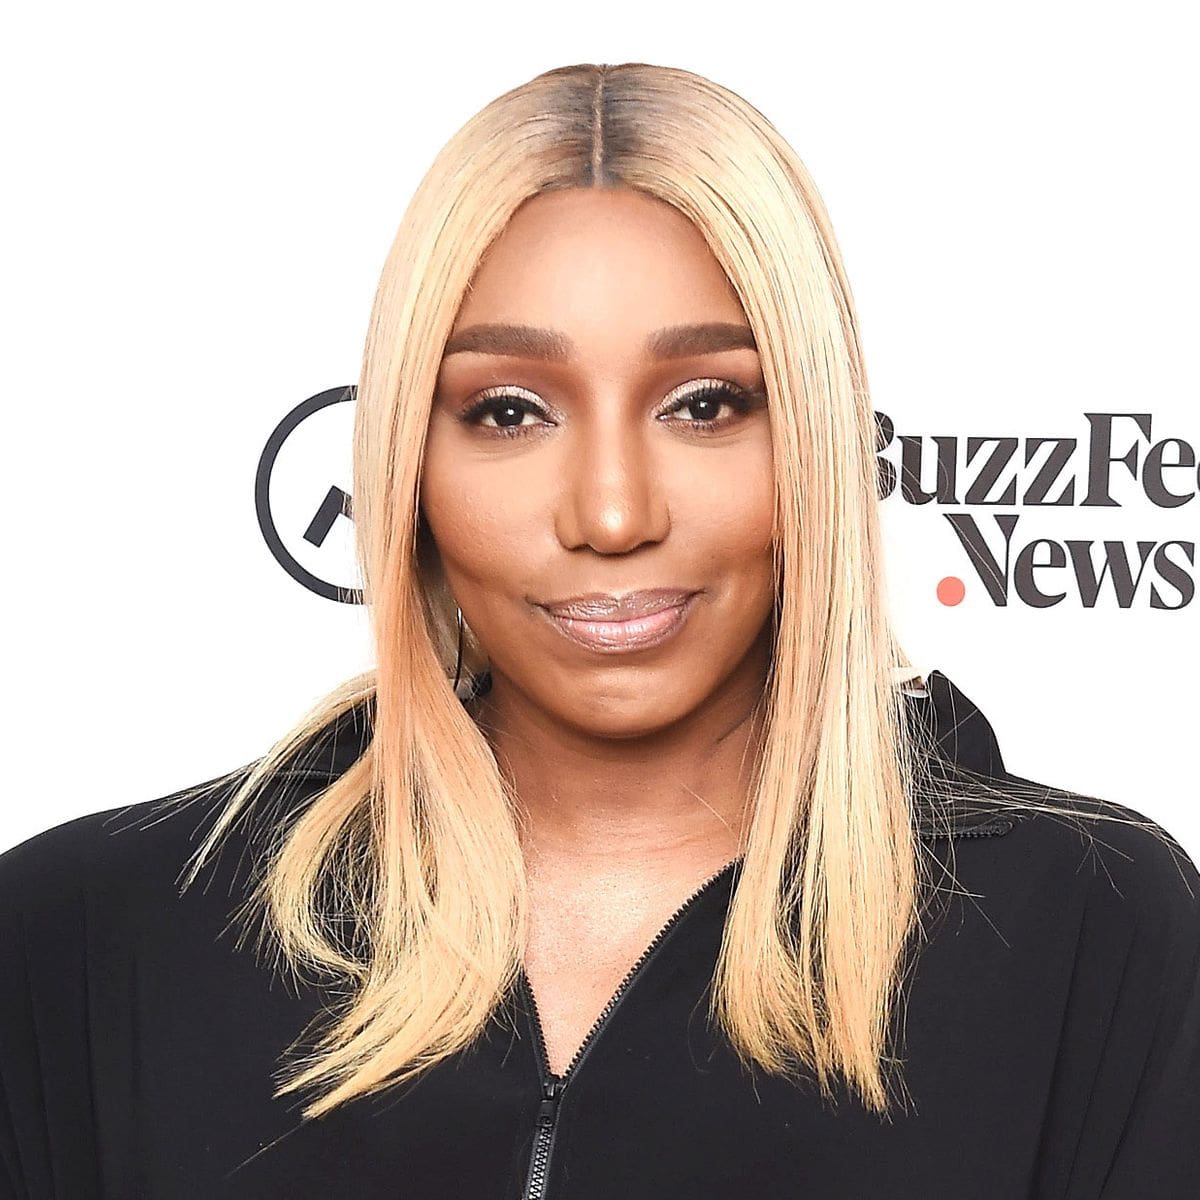 ”nene-leakes-breaks-the-internet-with-this-beach-photos-fans-notice-a-beyonce-resemblance”